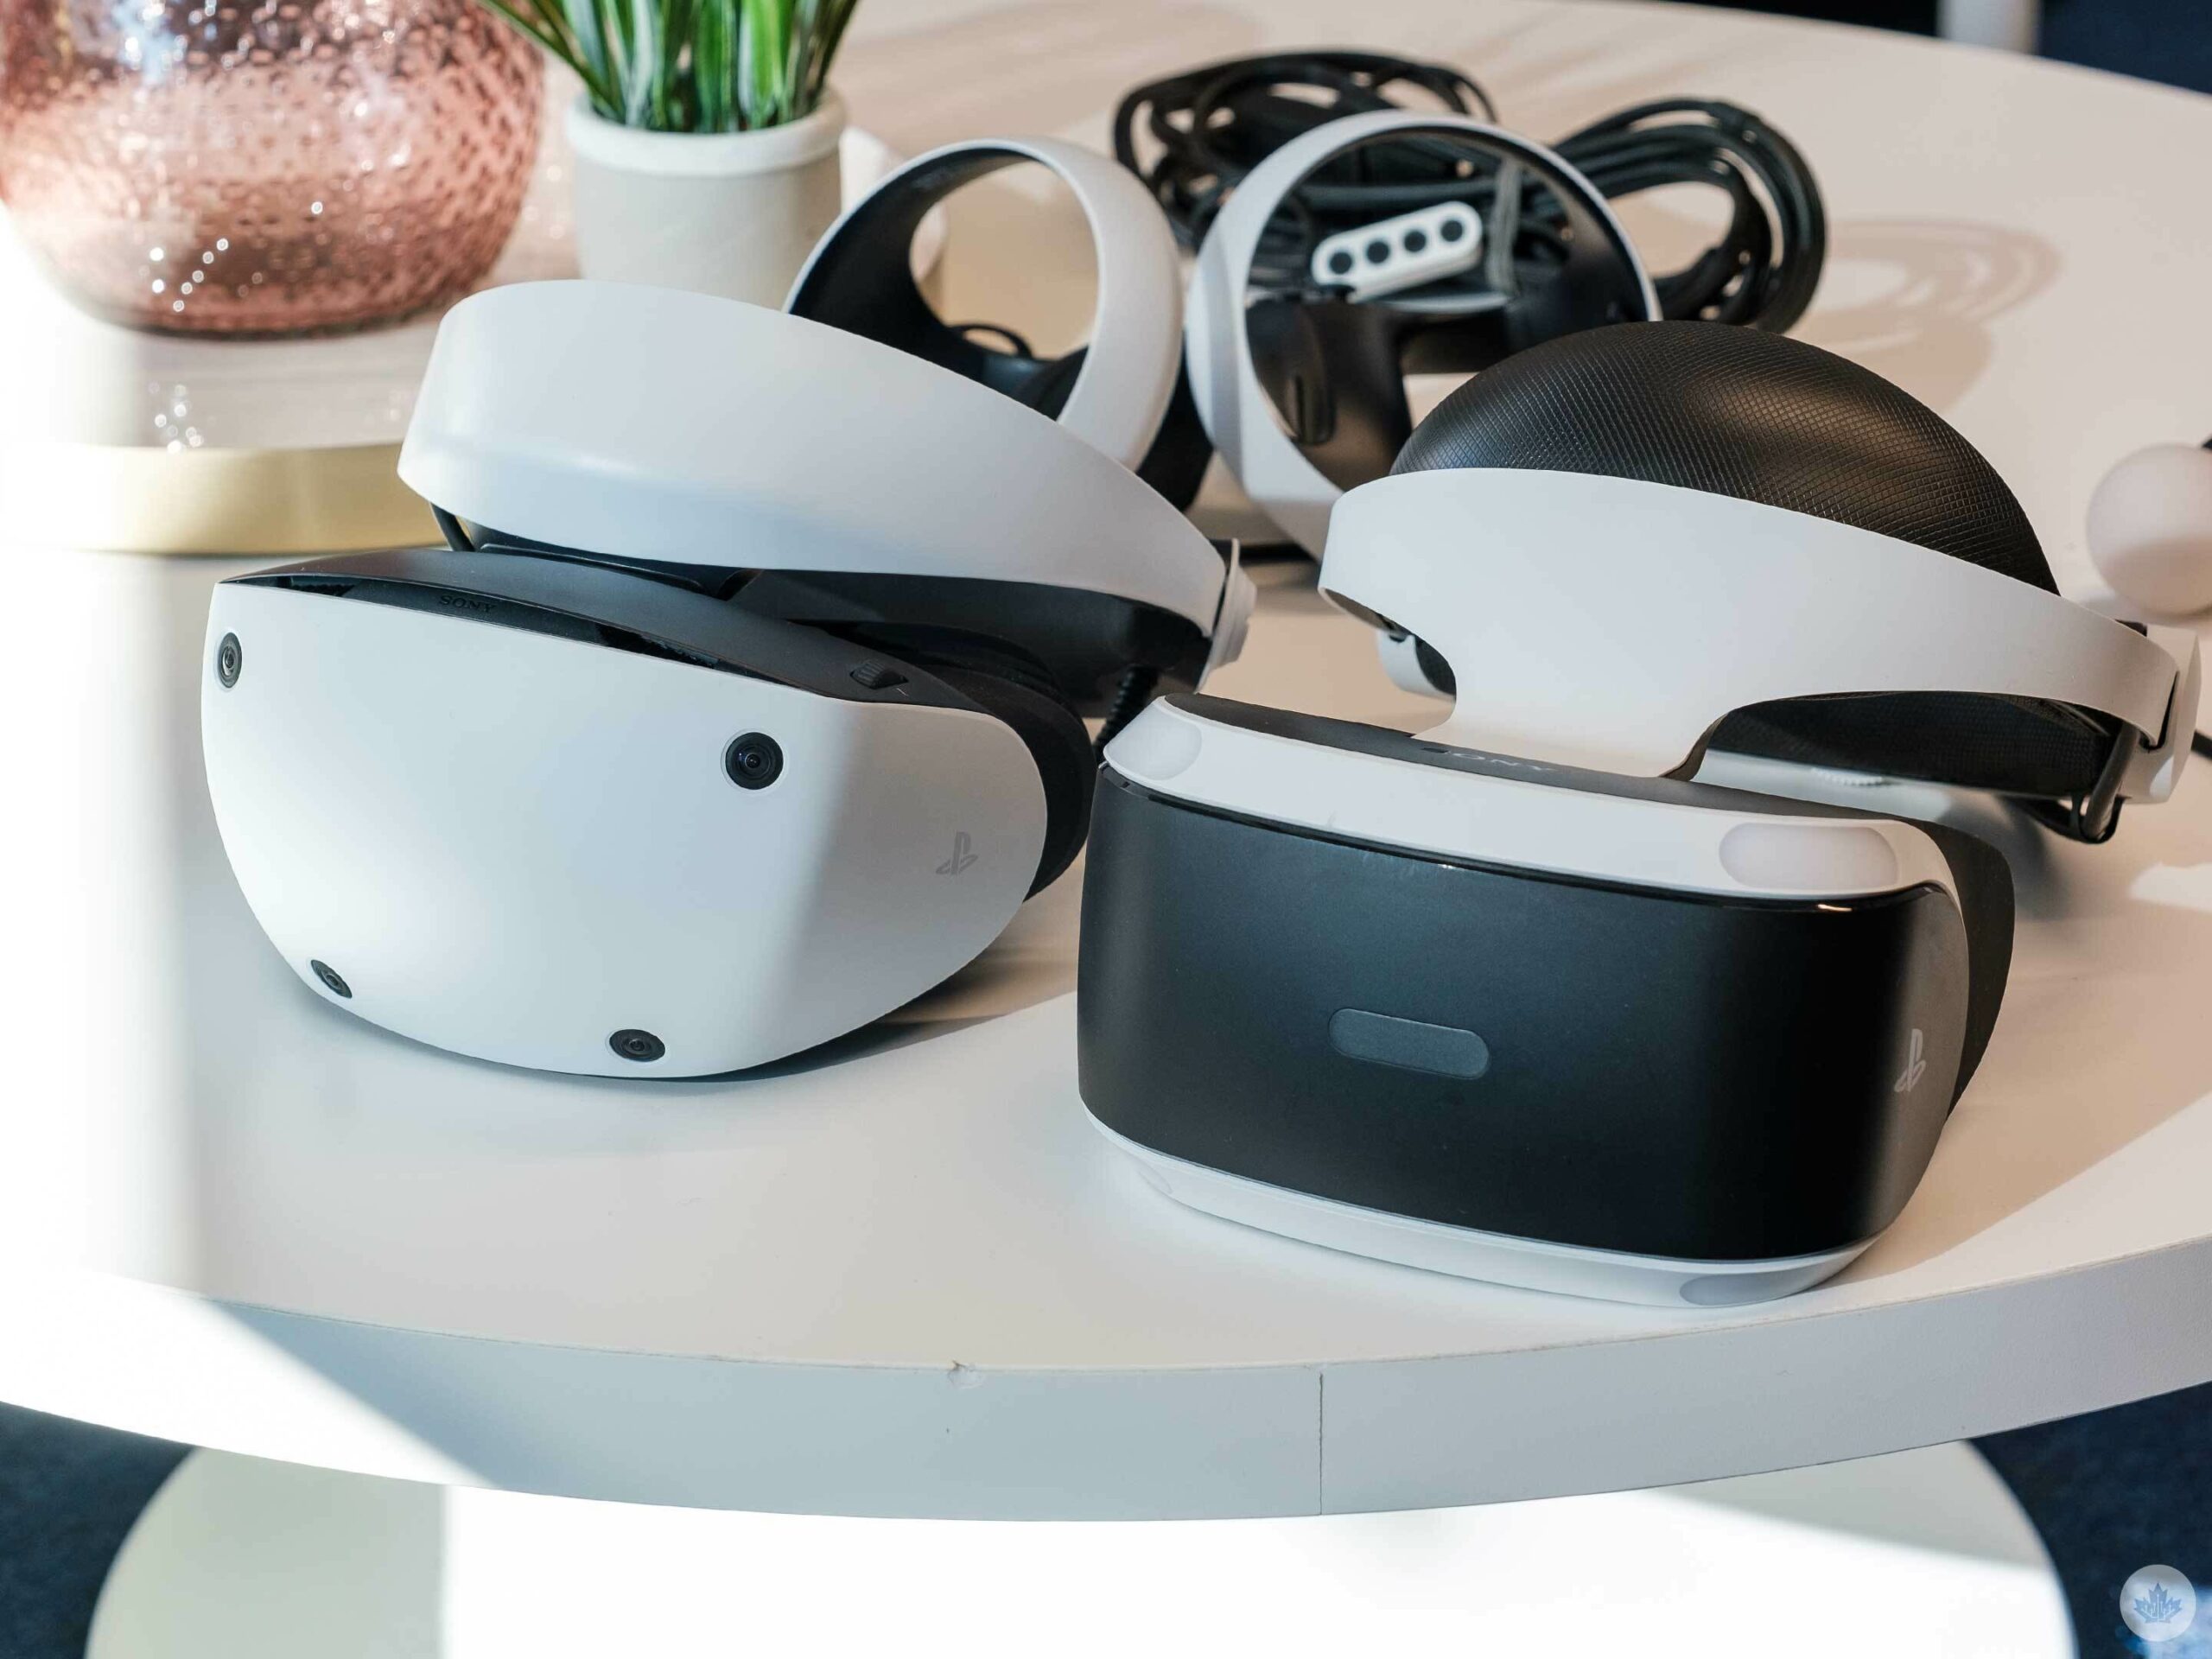 PS VR headsets